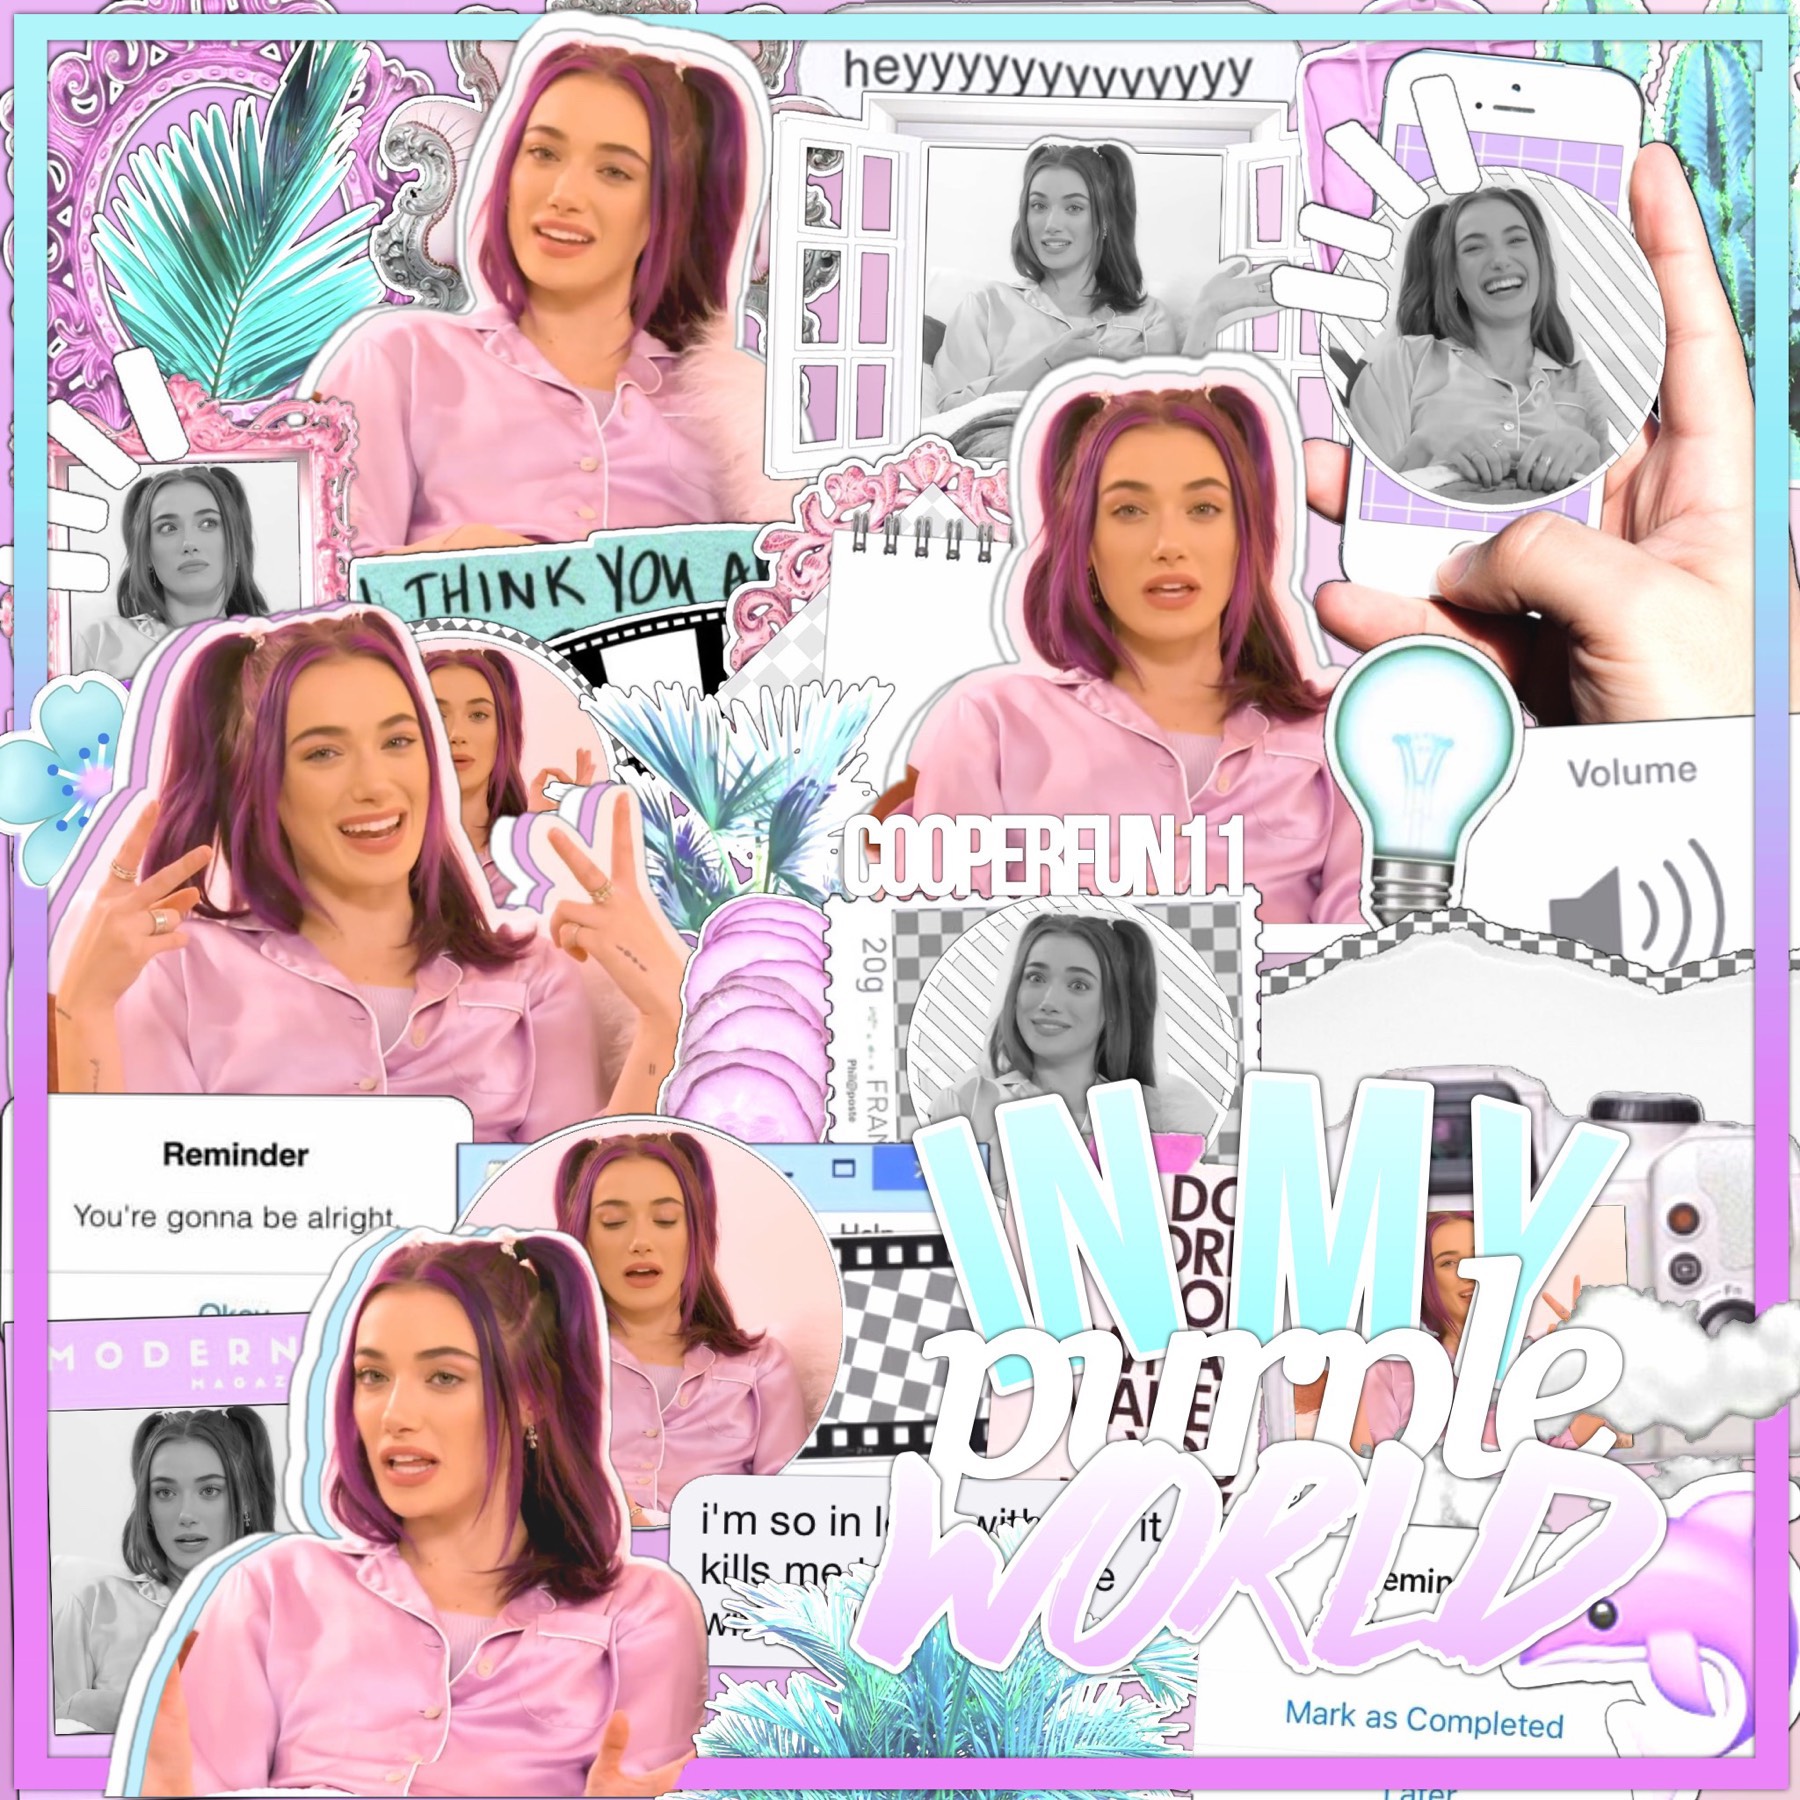 happy friday! 🦋 this is my first olivia edit! she makes such good music (go check it out!😉) obvious inspo credit to @Zswaggerina!💘 what are you guys planning to do this weekend? I’ve been doing some writing lately. 🐬